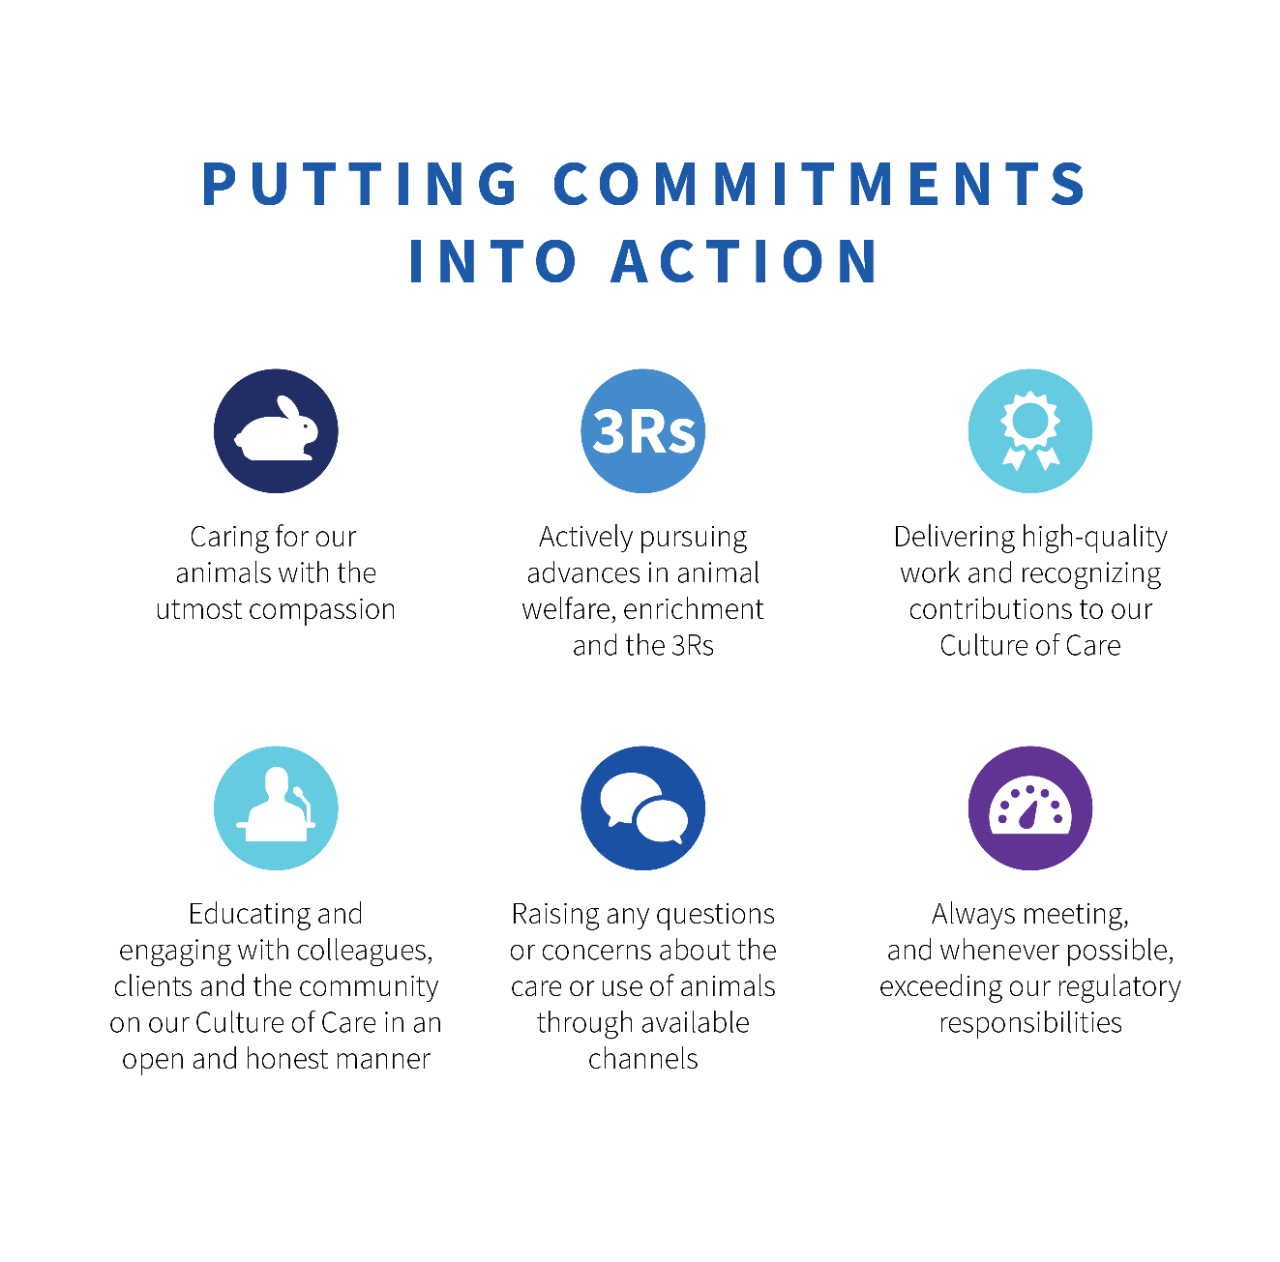 coc-website-putting-commitments-into-action